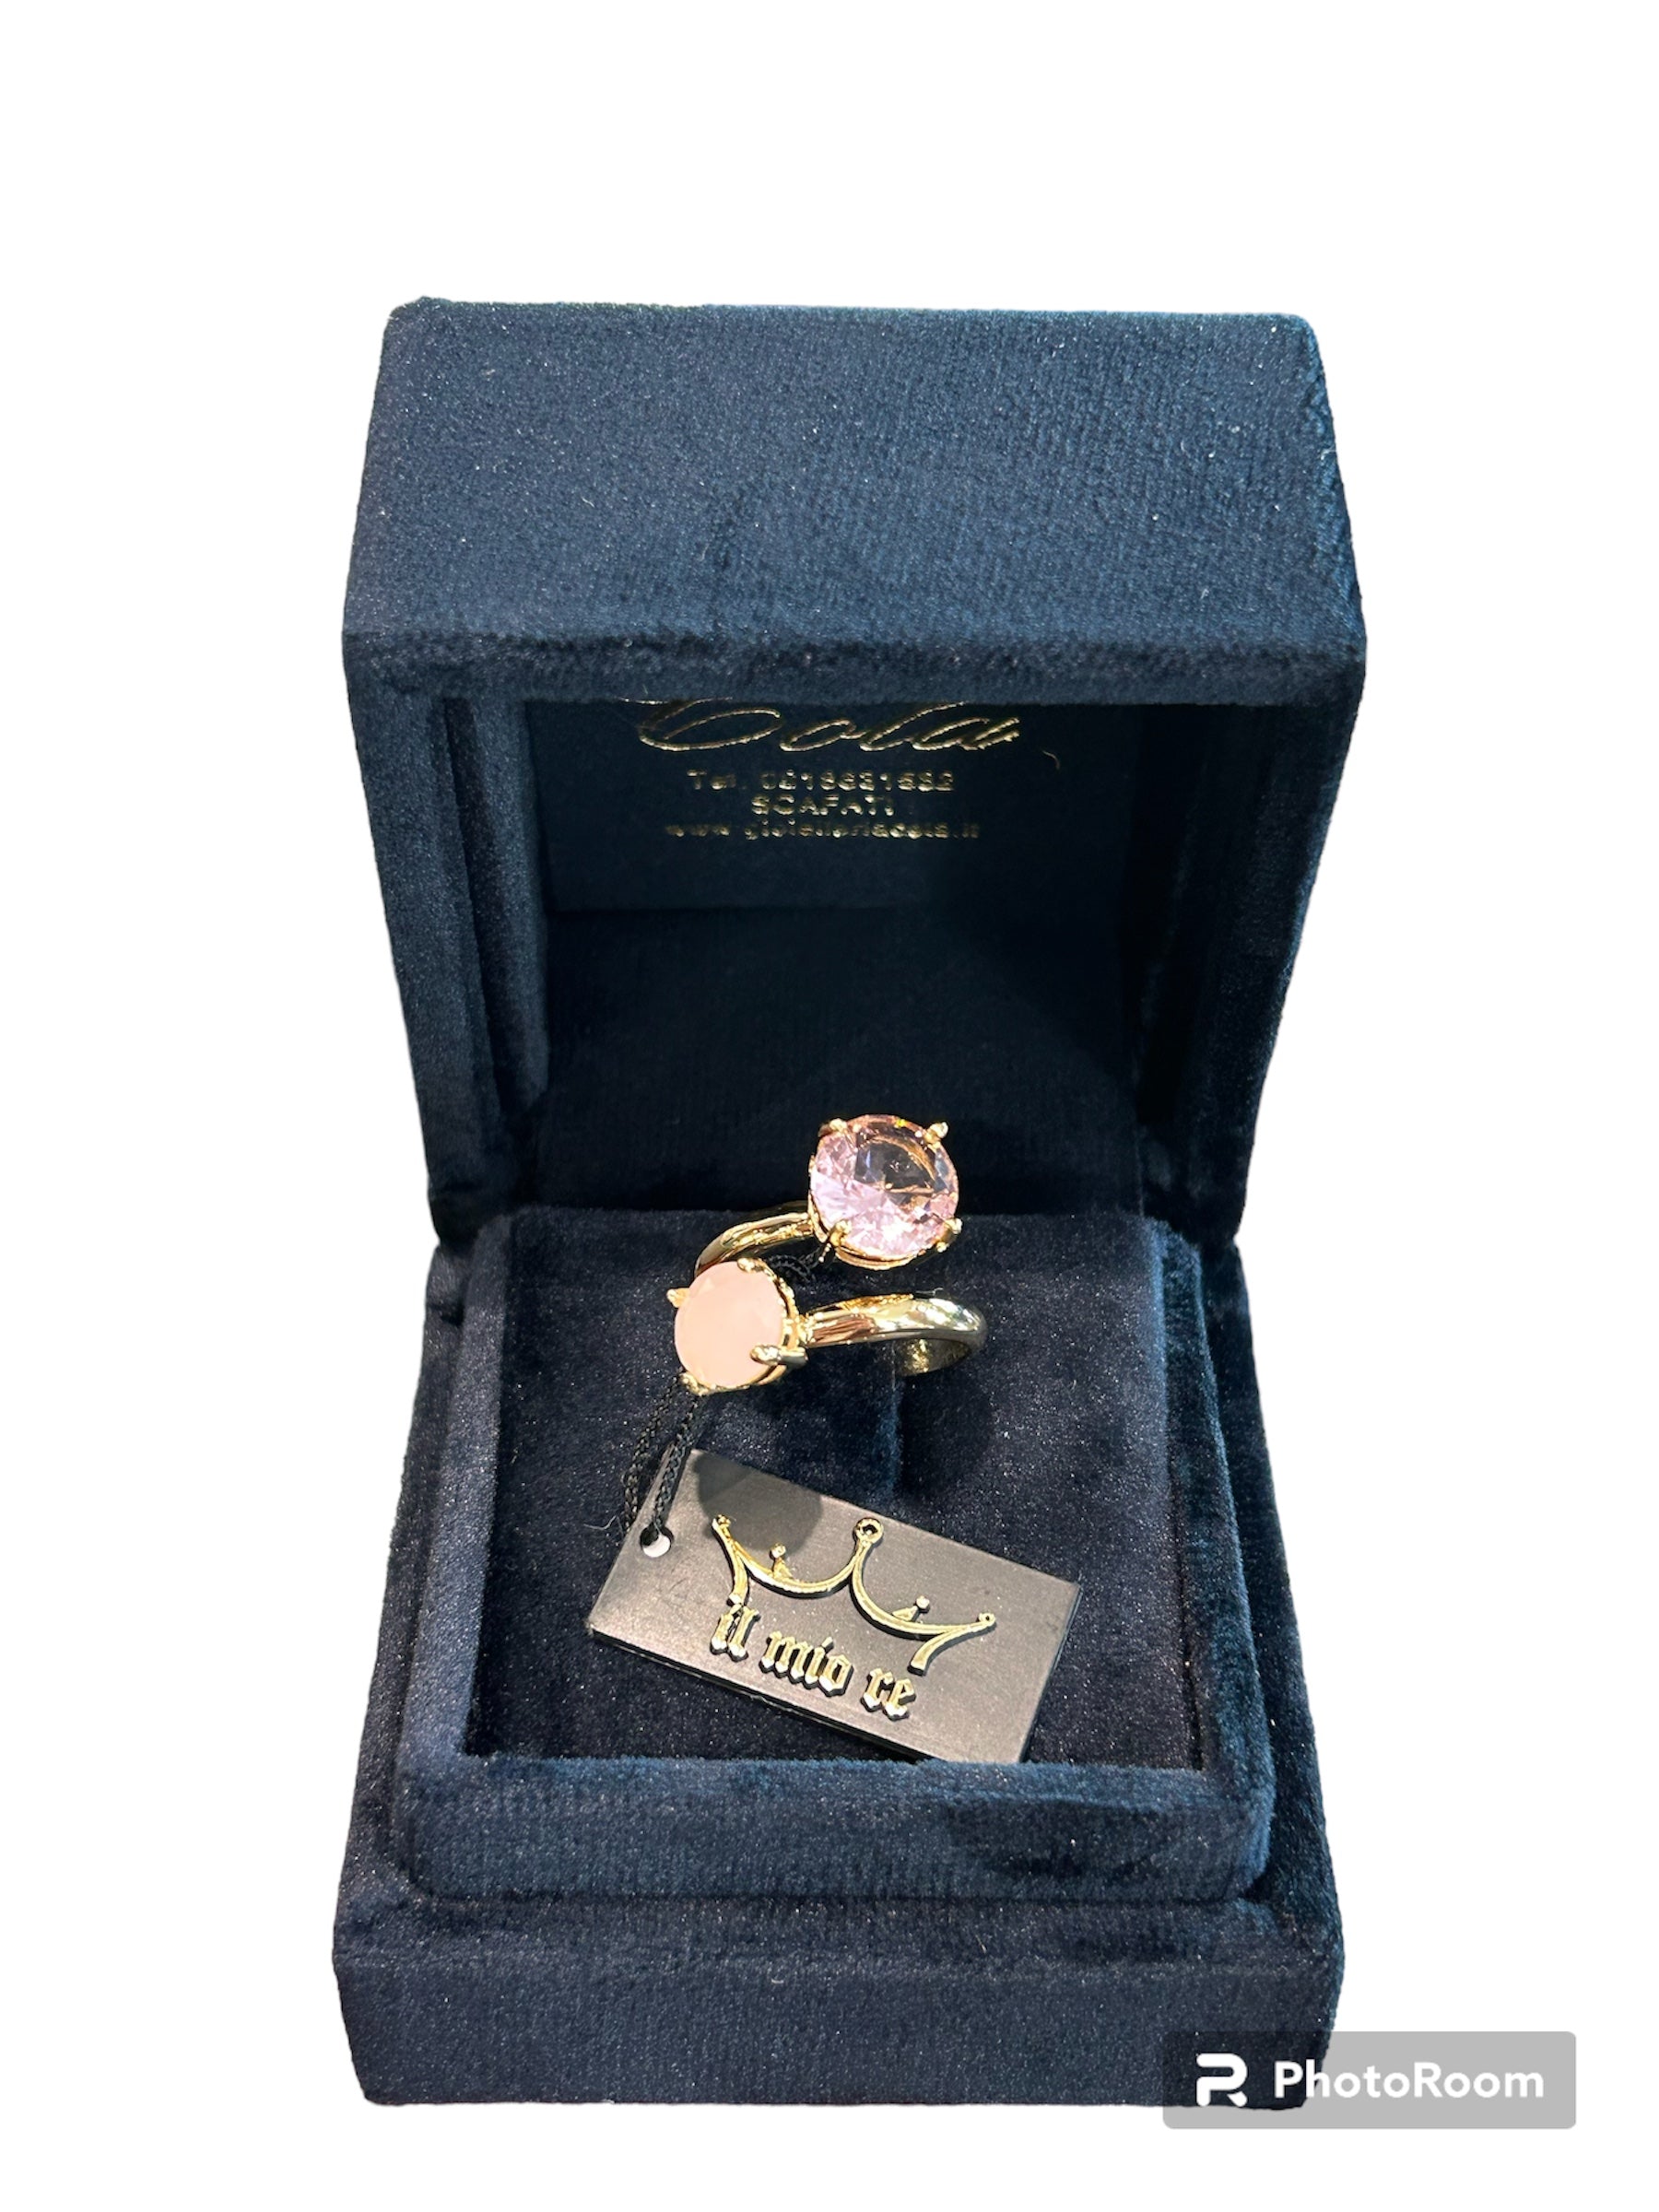 IL Mio Re - Small gilded bronze ring with pink stones - ILMIORE AN 021R